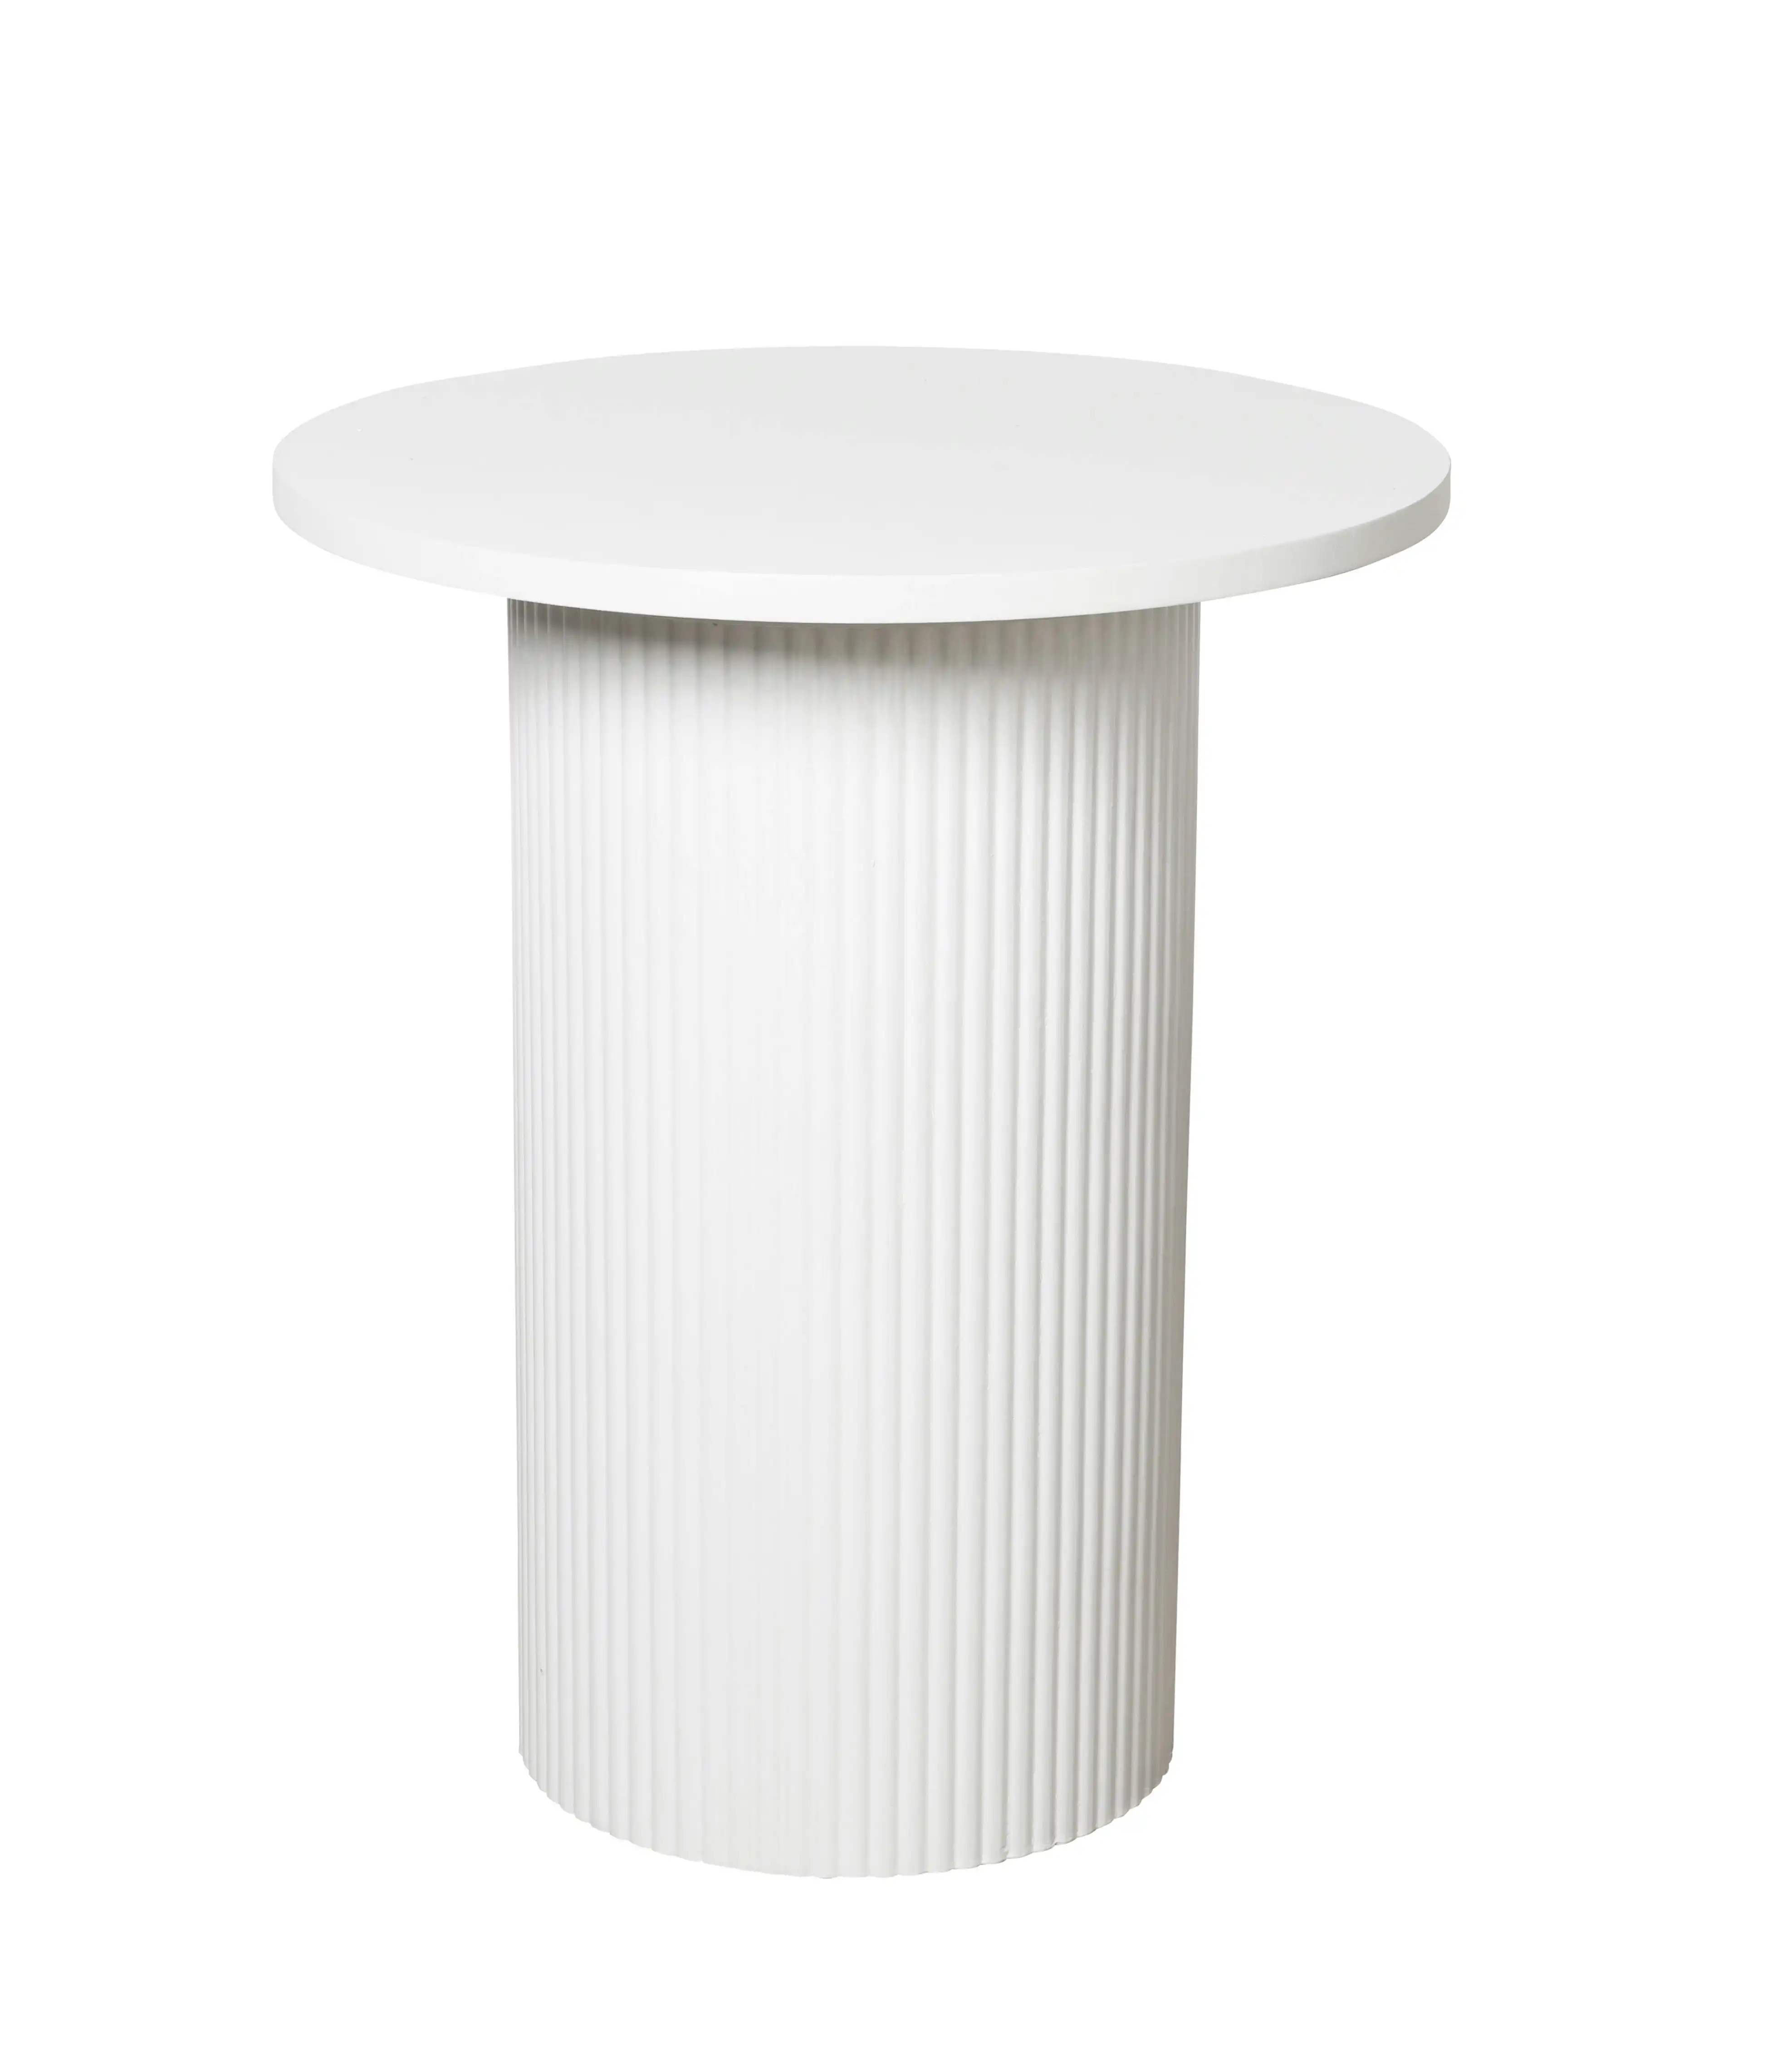 40cm Blanche Fluted Round Coffee Table White